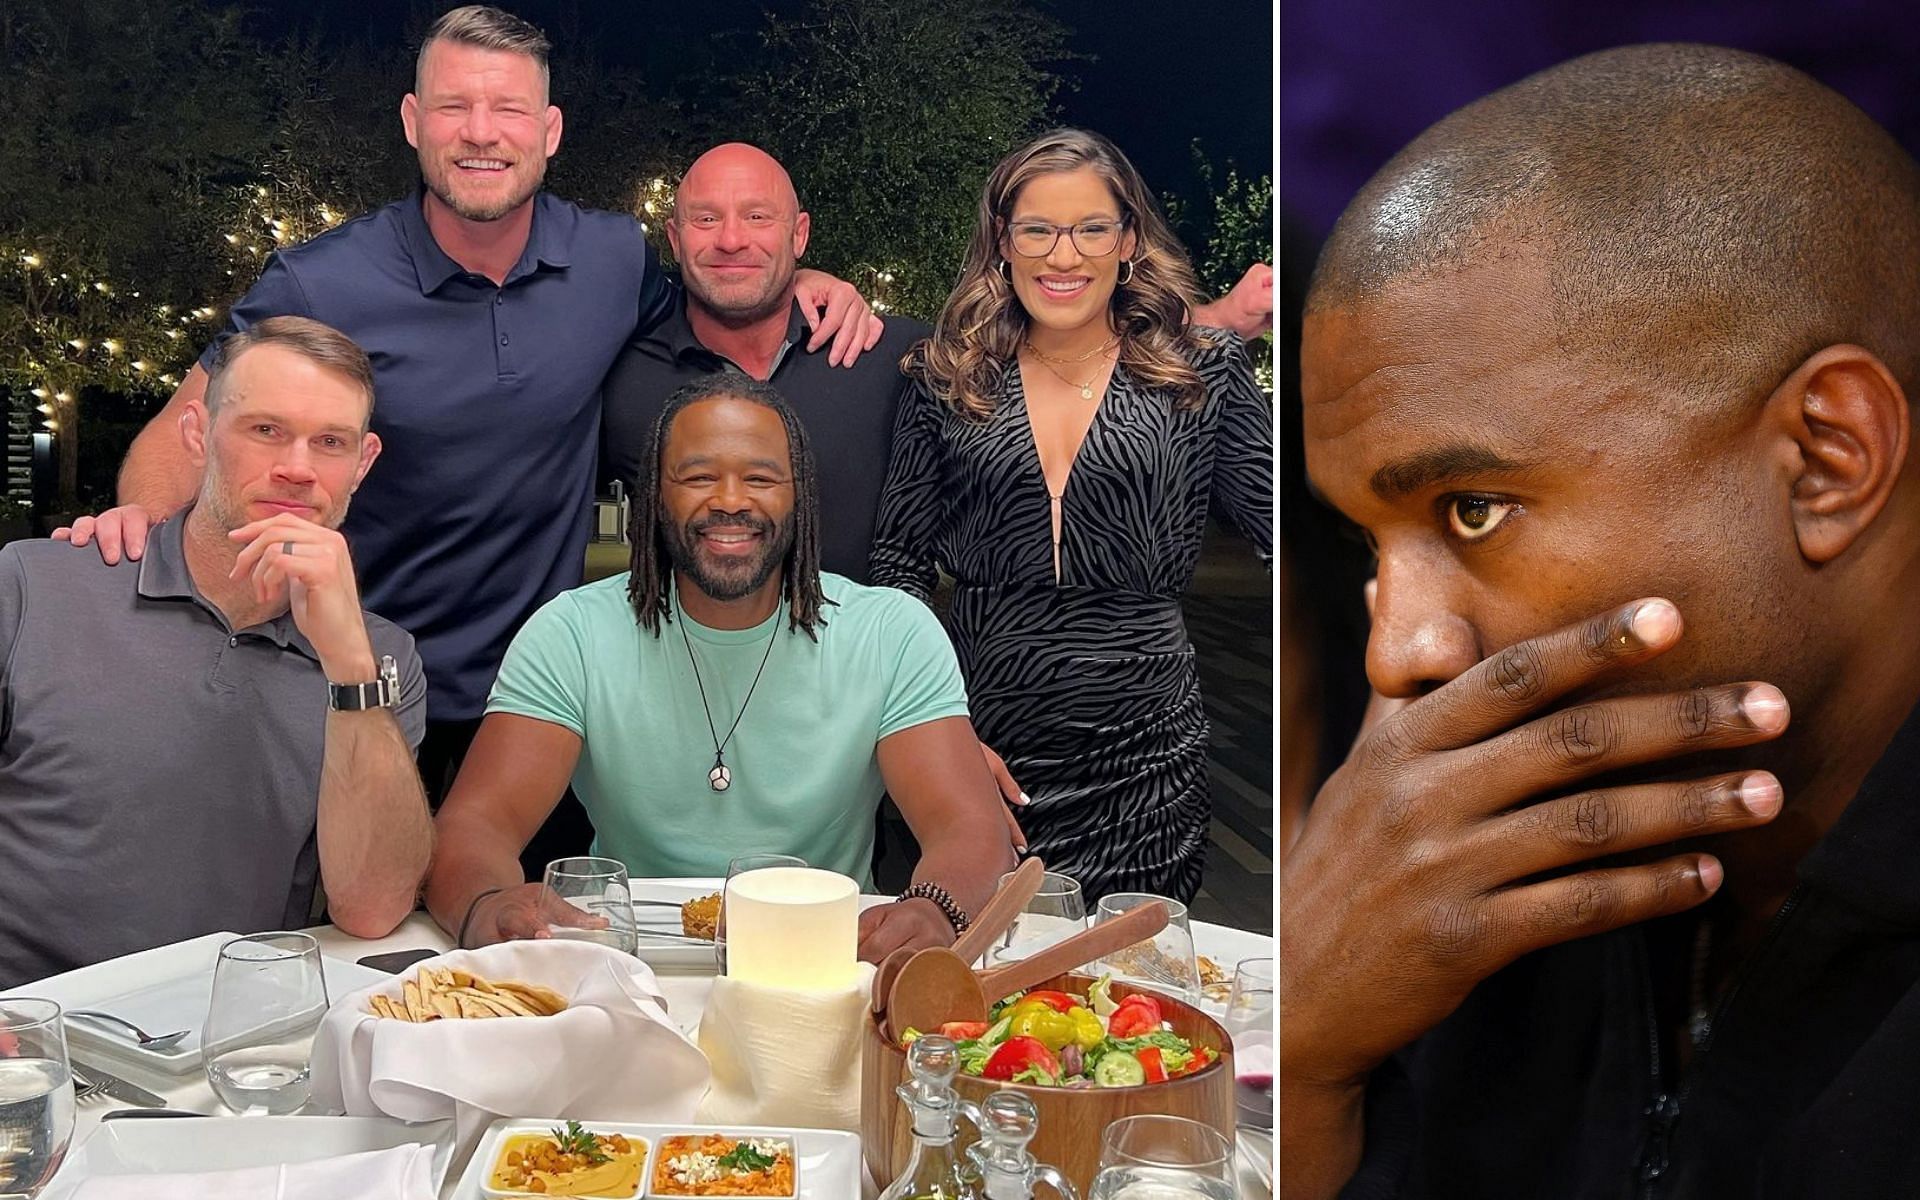 Michael Bisping, Forrest Griffin, Rashad Evans, Julianna Pena, and Matt Serra (Left) and Kanye West (Right) (Images courtesy of @mikebisping Instagram and Getty)